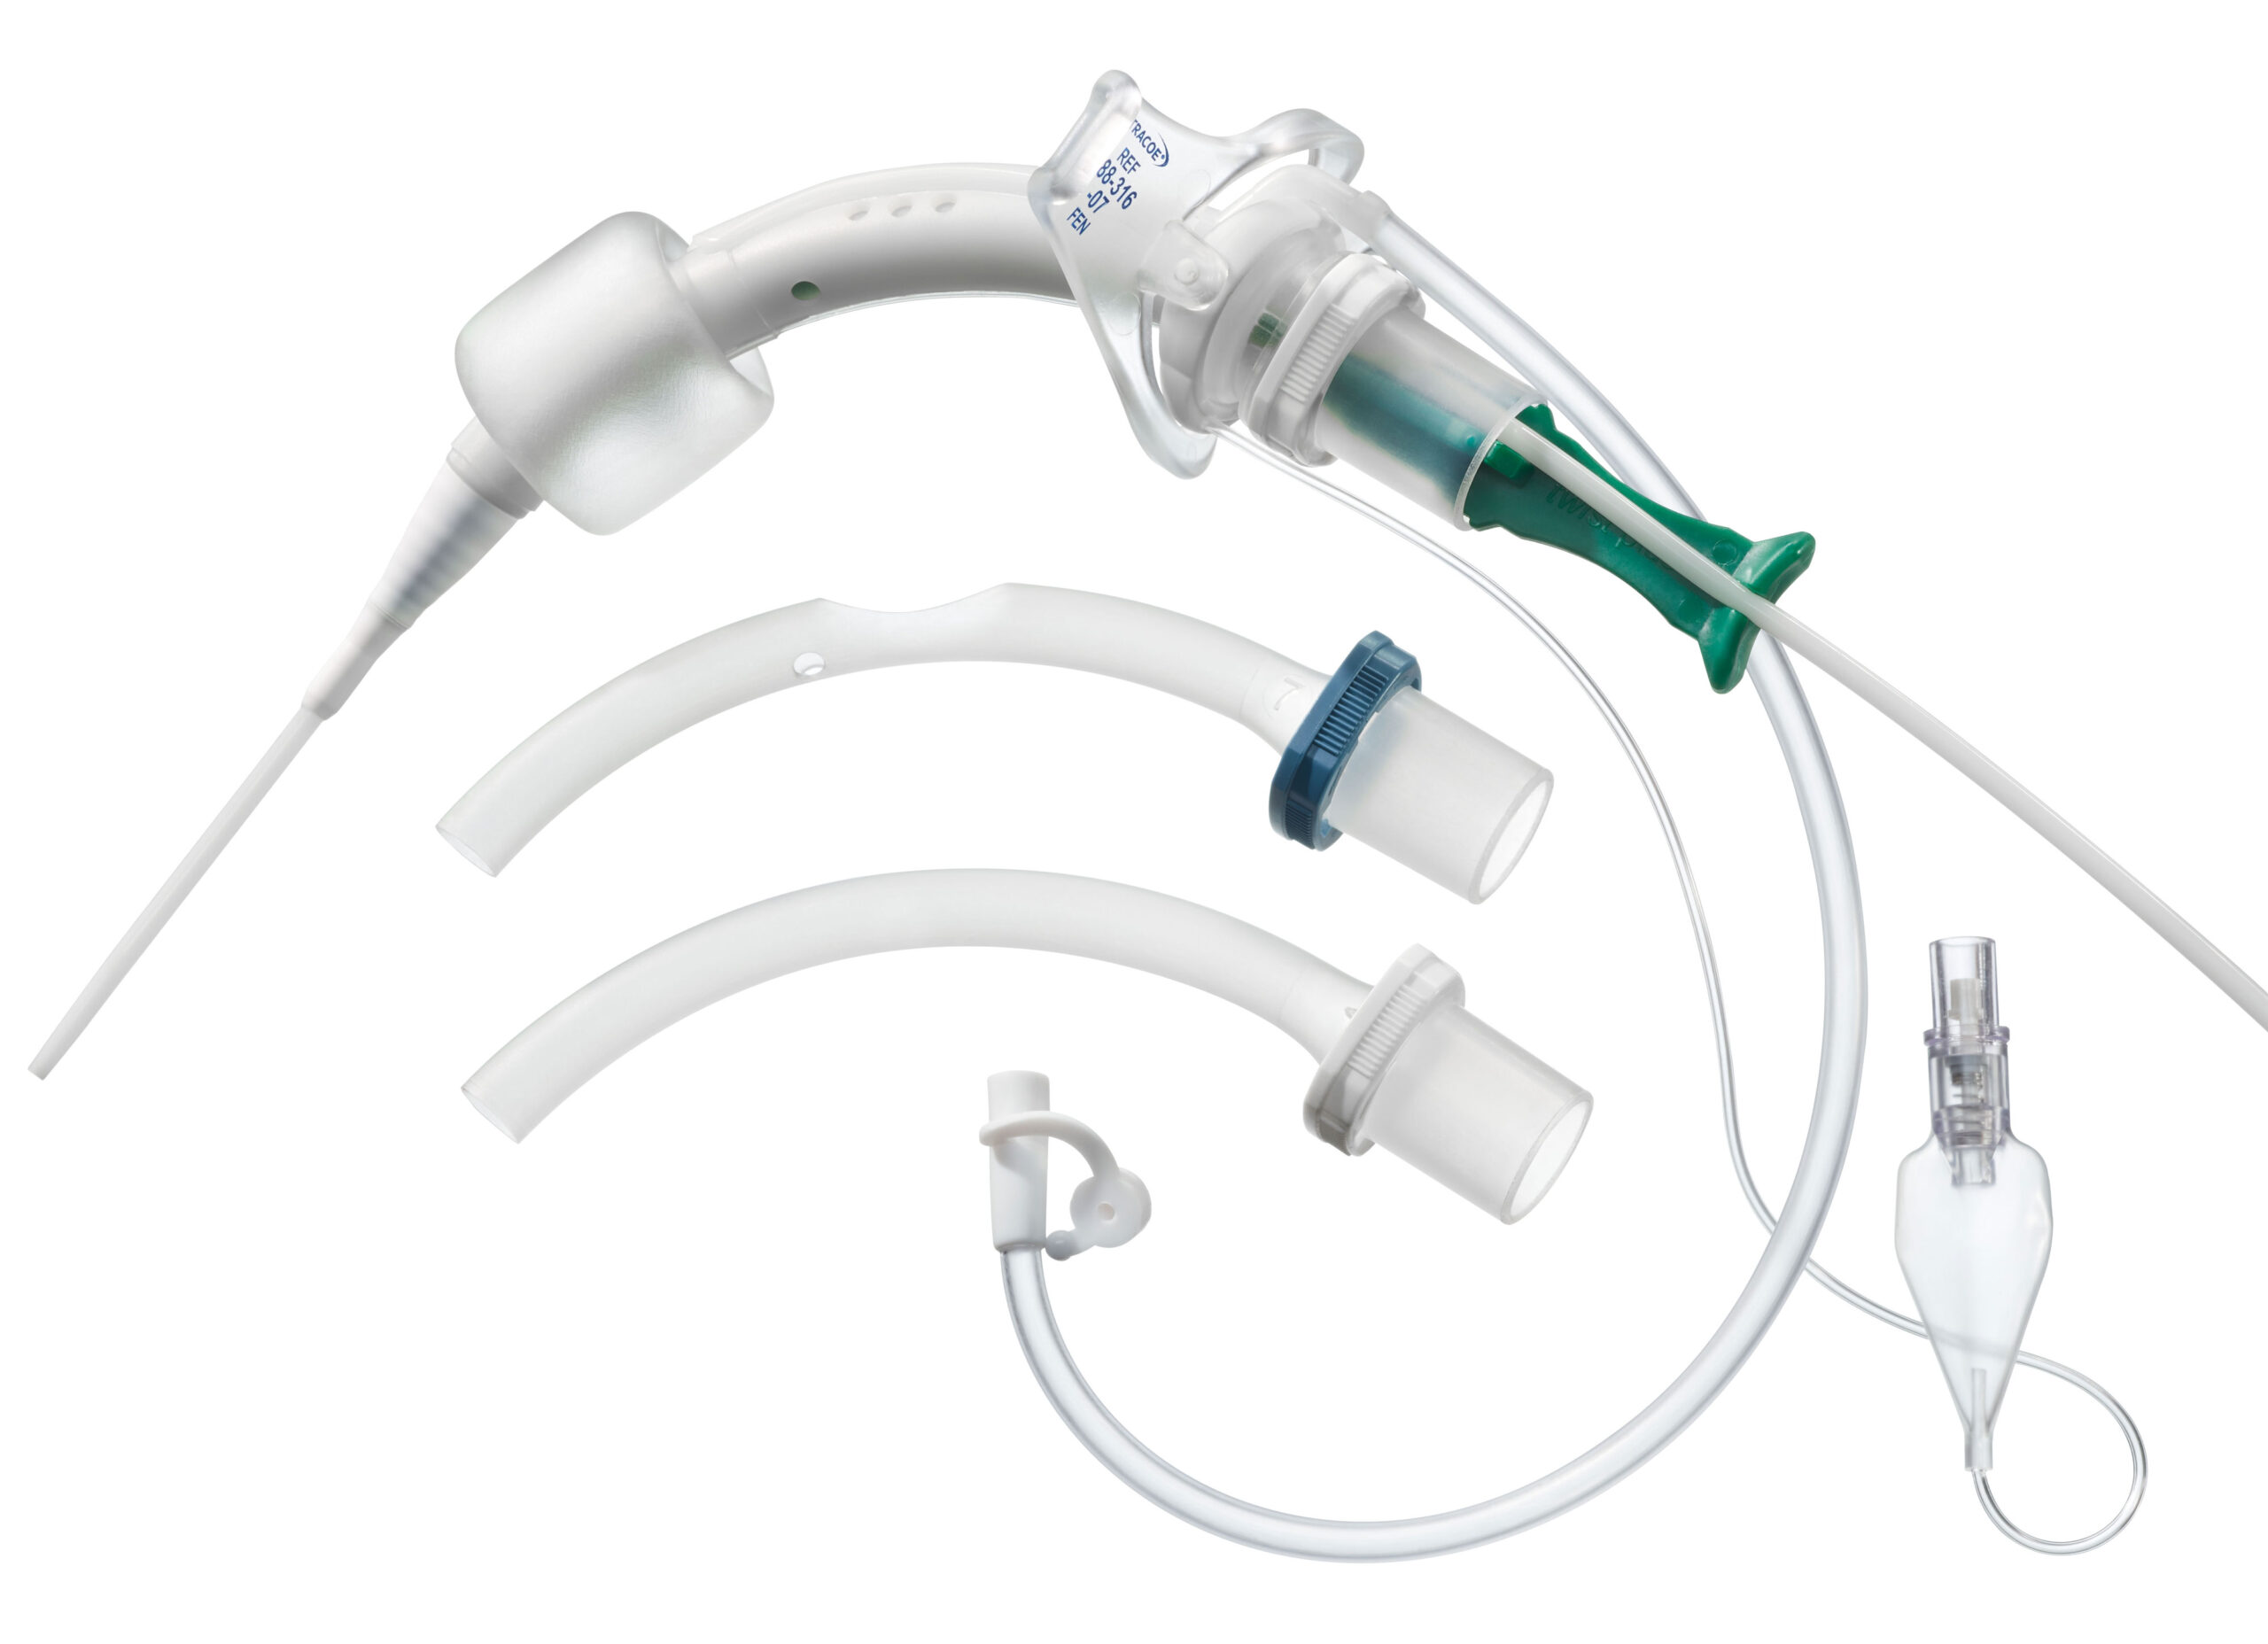 Dilation set + tracheostomy tube with low-pressure cuff, double fenestration, subglottic suction channel and minimally traumatic insertion system